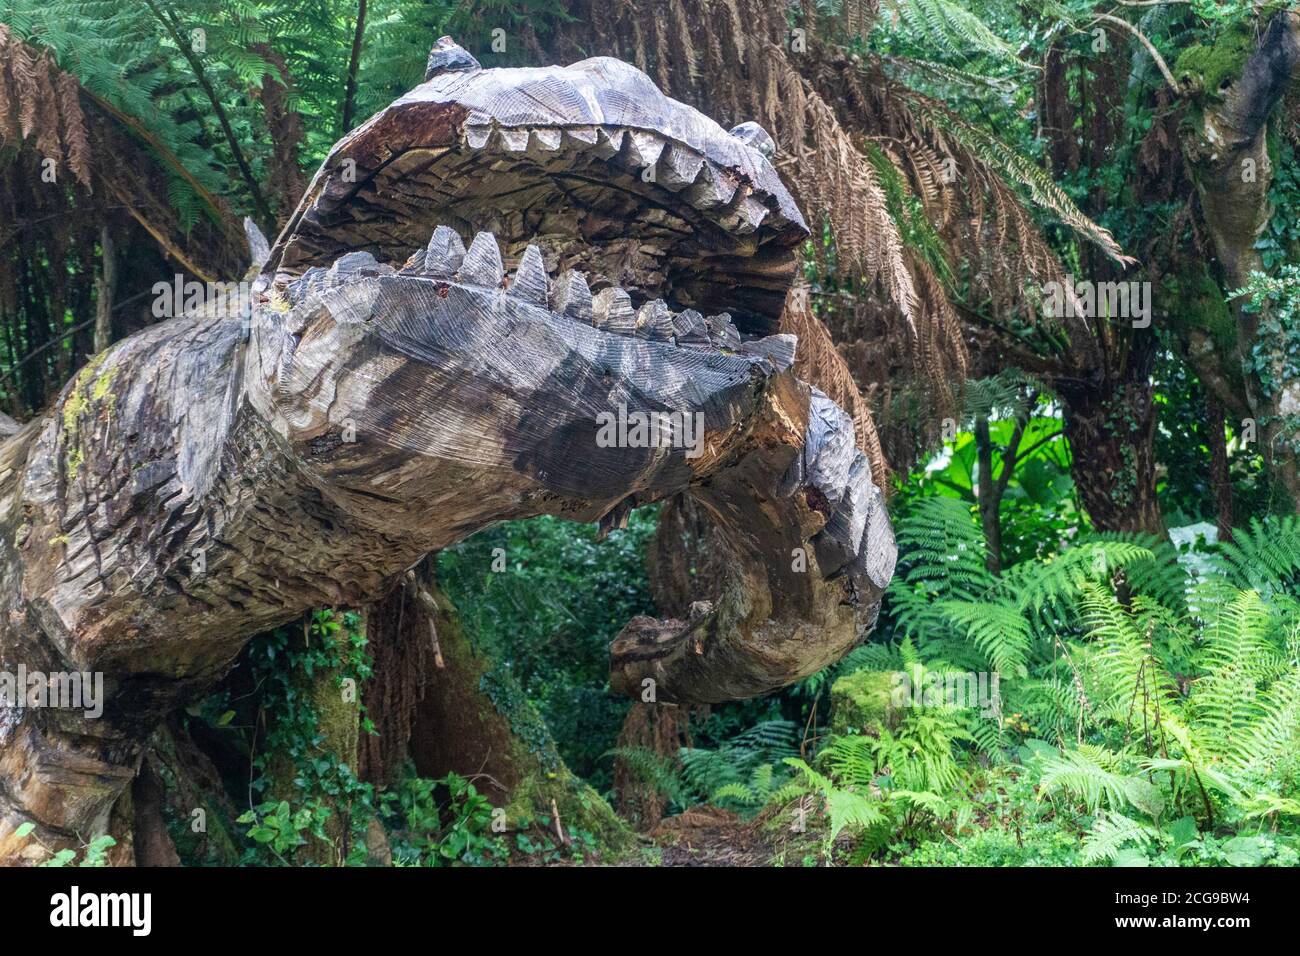 A dinosaur carved from a fallen tree by the artist Pieter Koning in the gardens of Kells Bay House, Kells, County Kerry, Ireland. Stock Photo